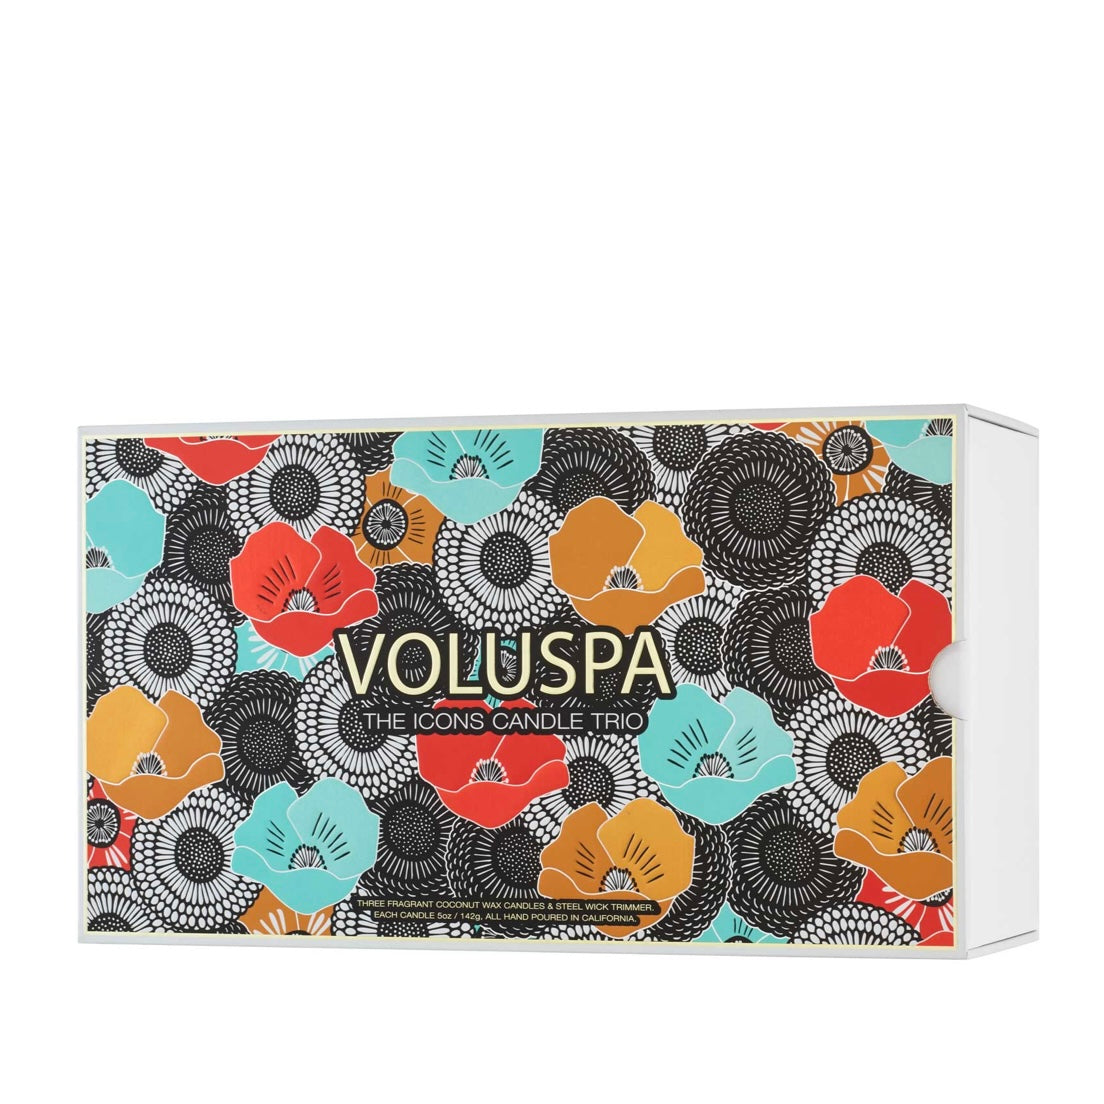 Voluspa XXV Limited Edition Candle Trio Assorted Gift Set